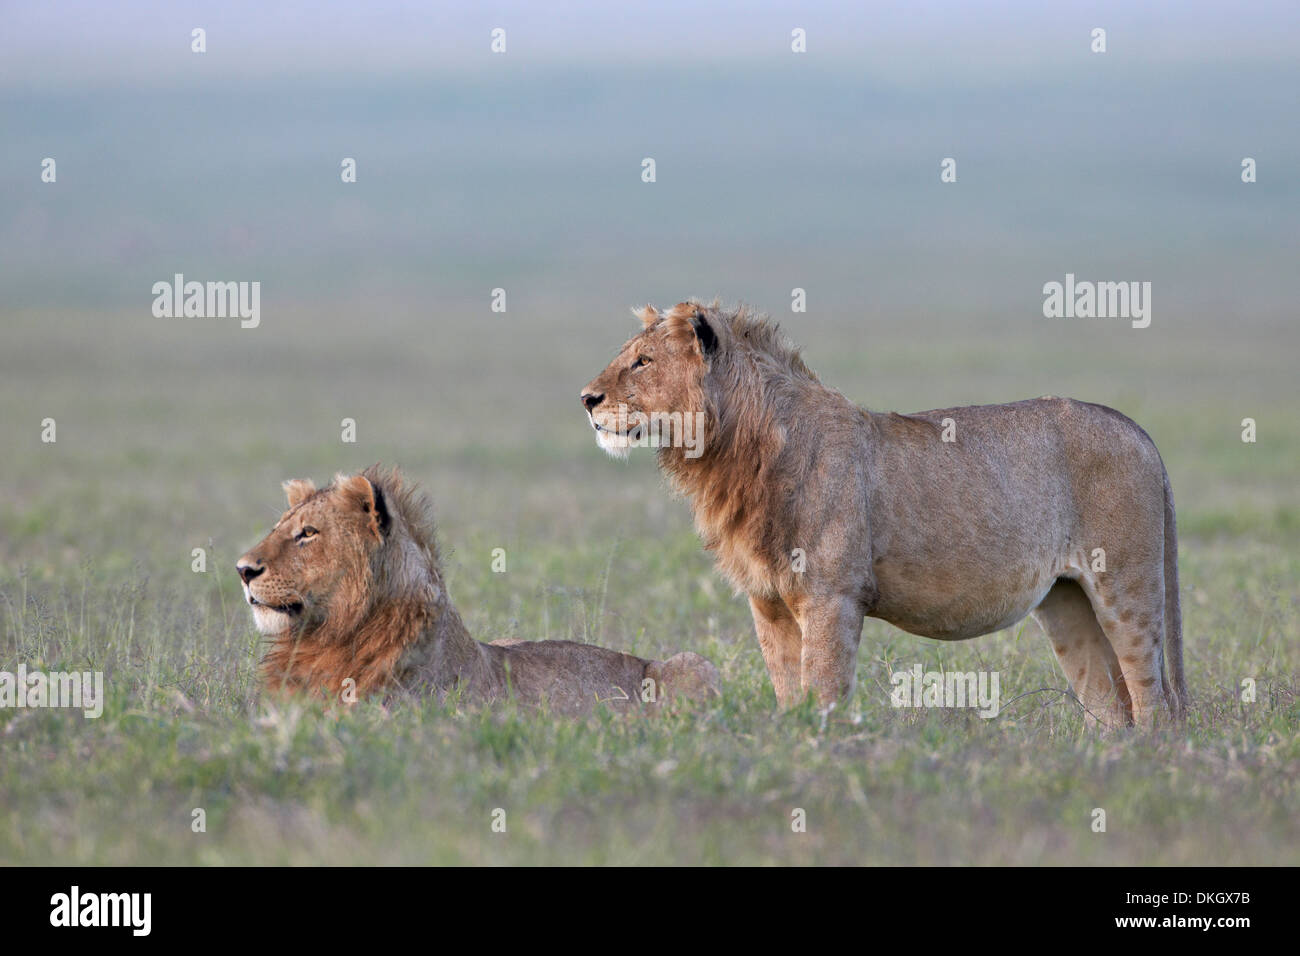 Two young male lions (Panthera leo), Ngorongoro Crater, Tanzania, East Africa, Africa Stock Photo